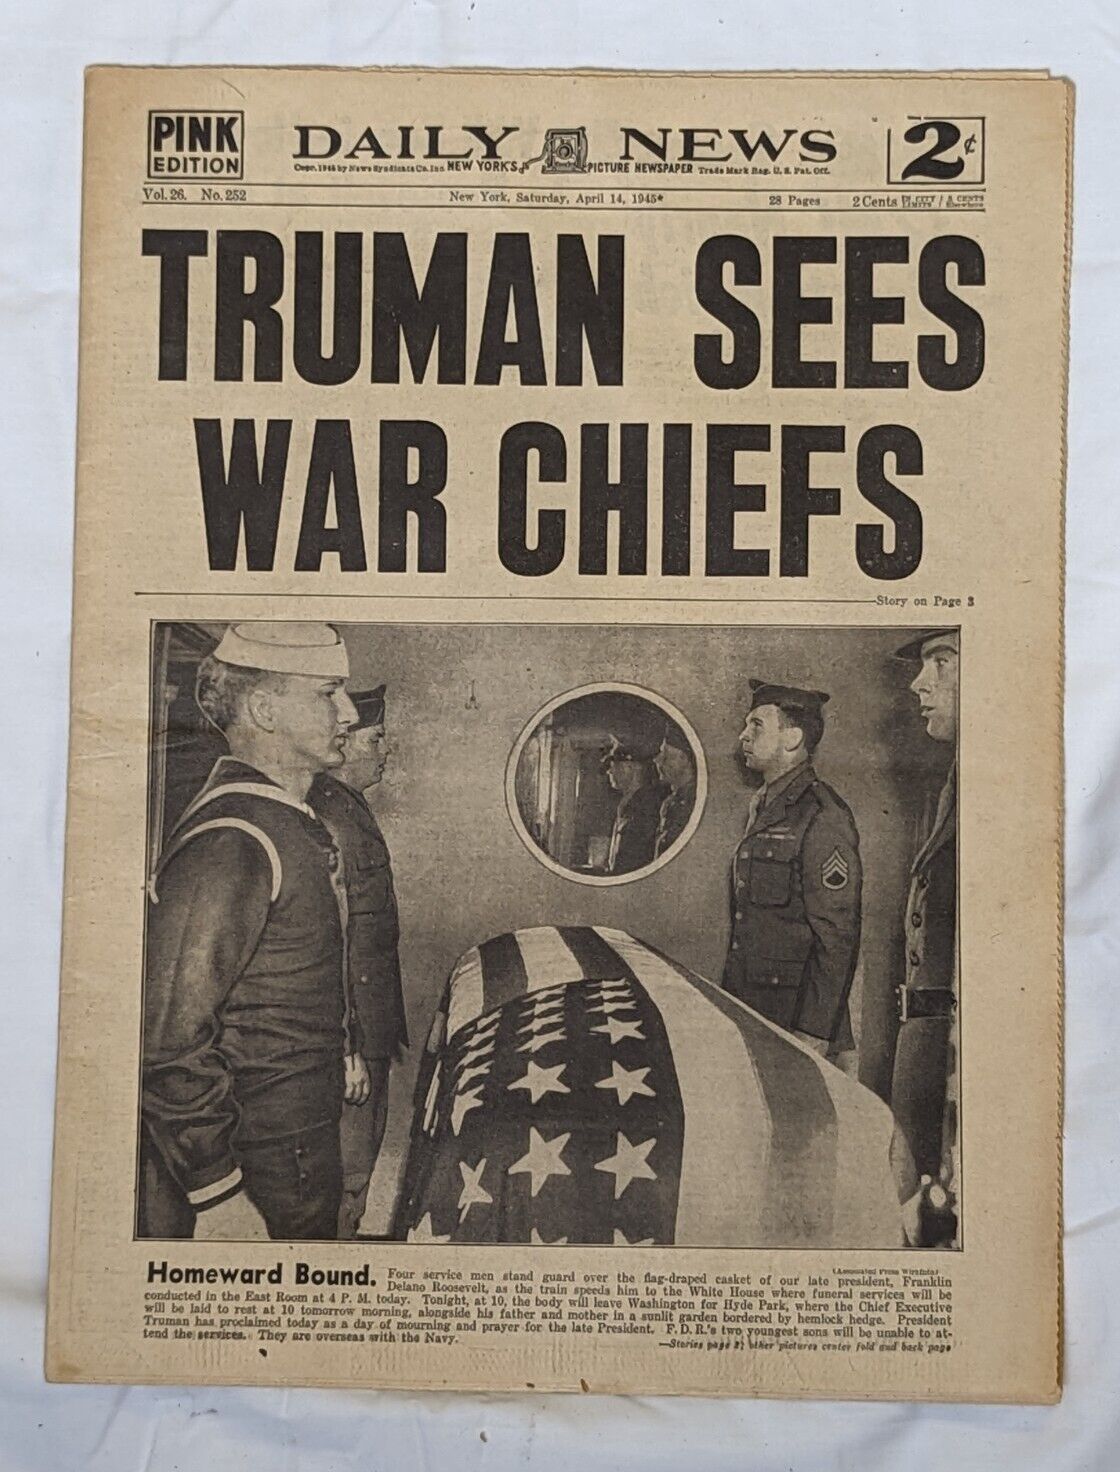 NY Daily News April 14th 1945 Harry Truman Sees War Chiefs Roosevelt Coffin